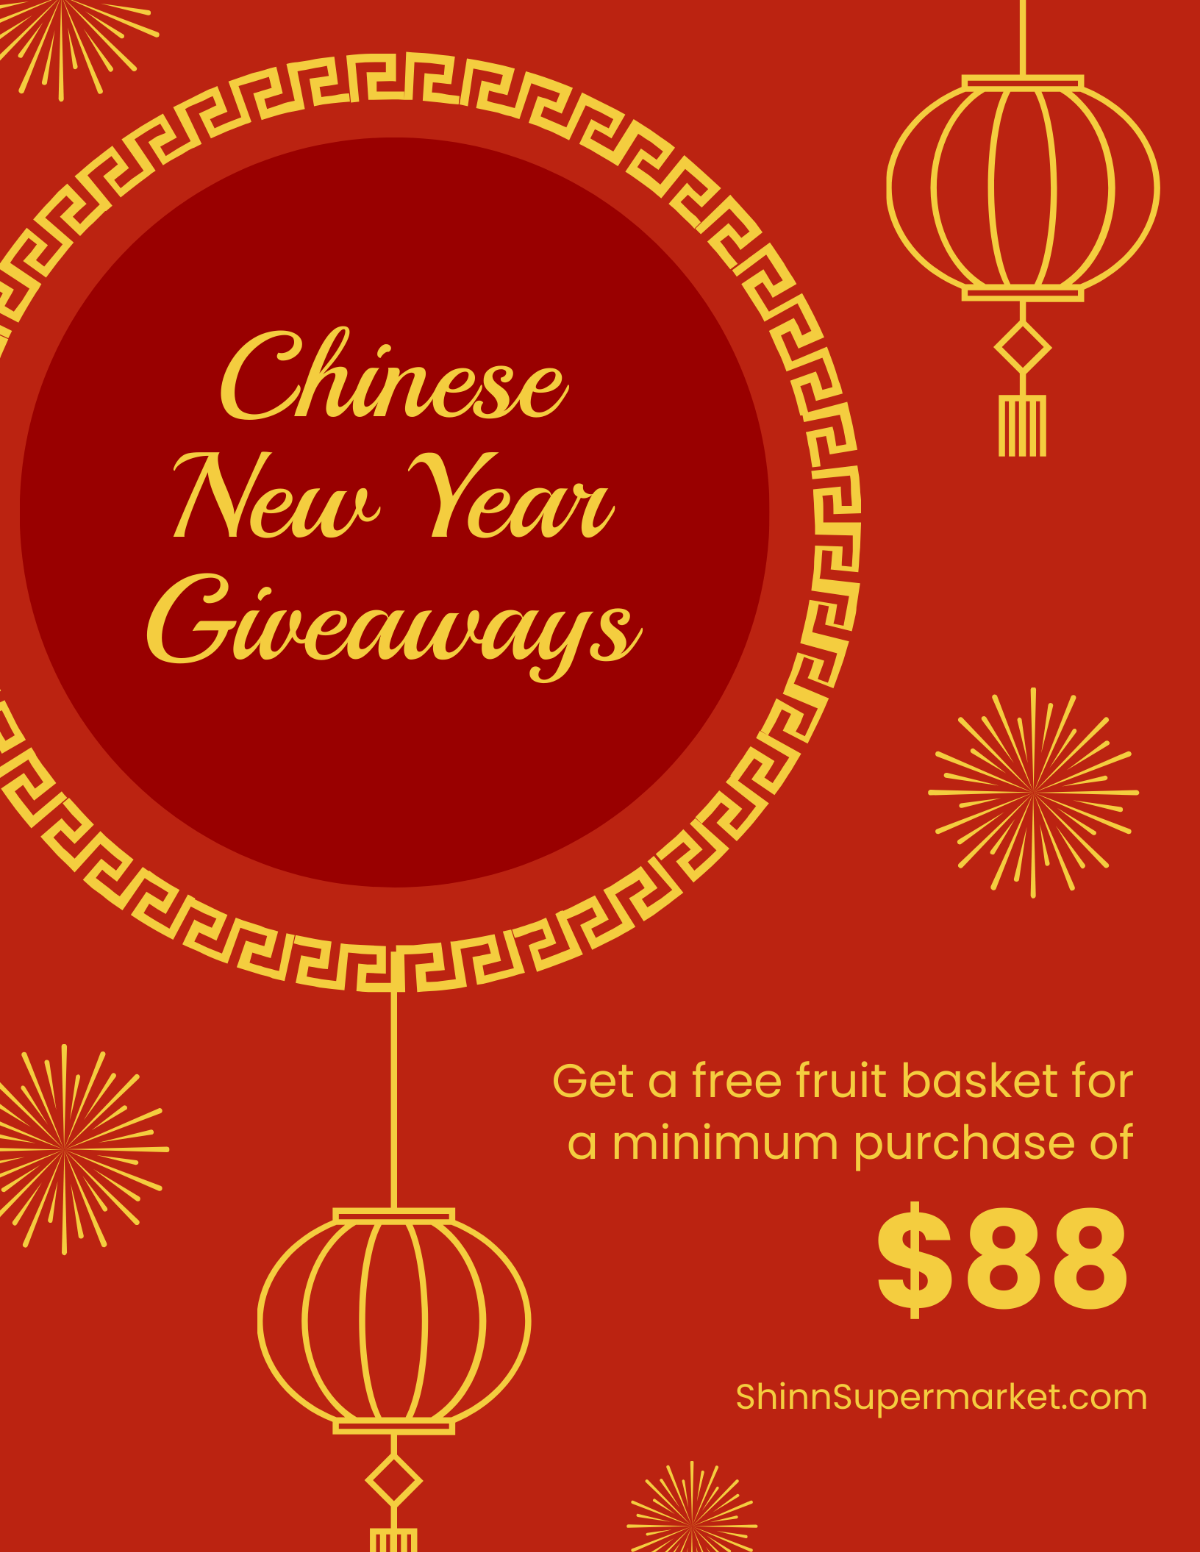 Chinese New Year Giveaway Flyer